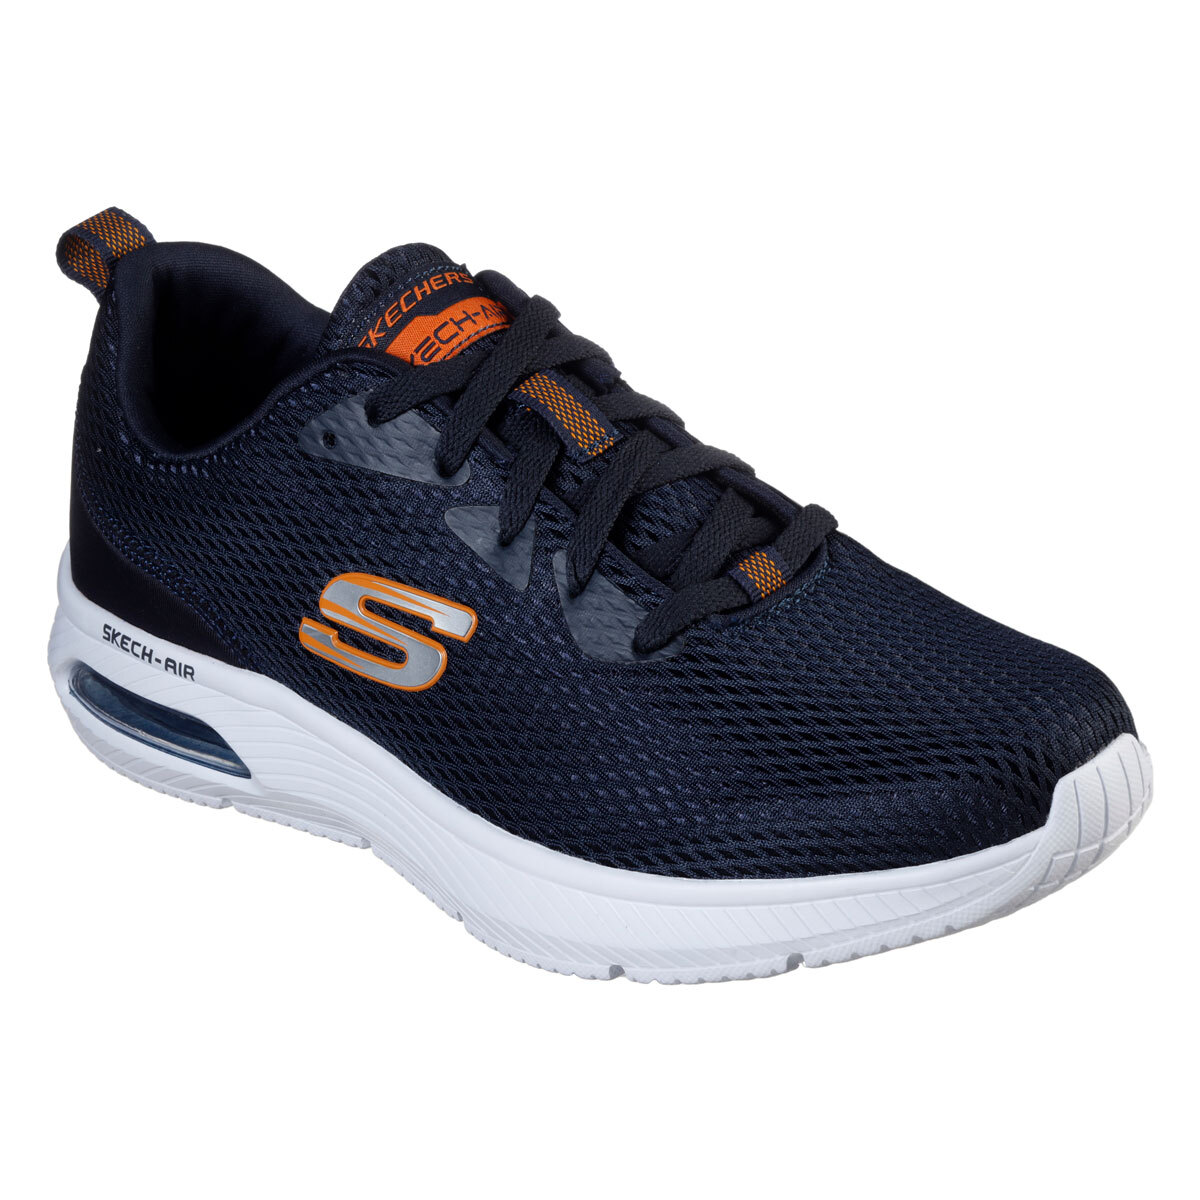 Skechers Dyna Air Men's Shoes in Navy, Size 8 | Costco UK